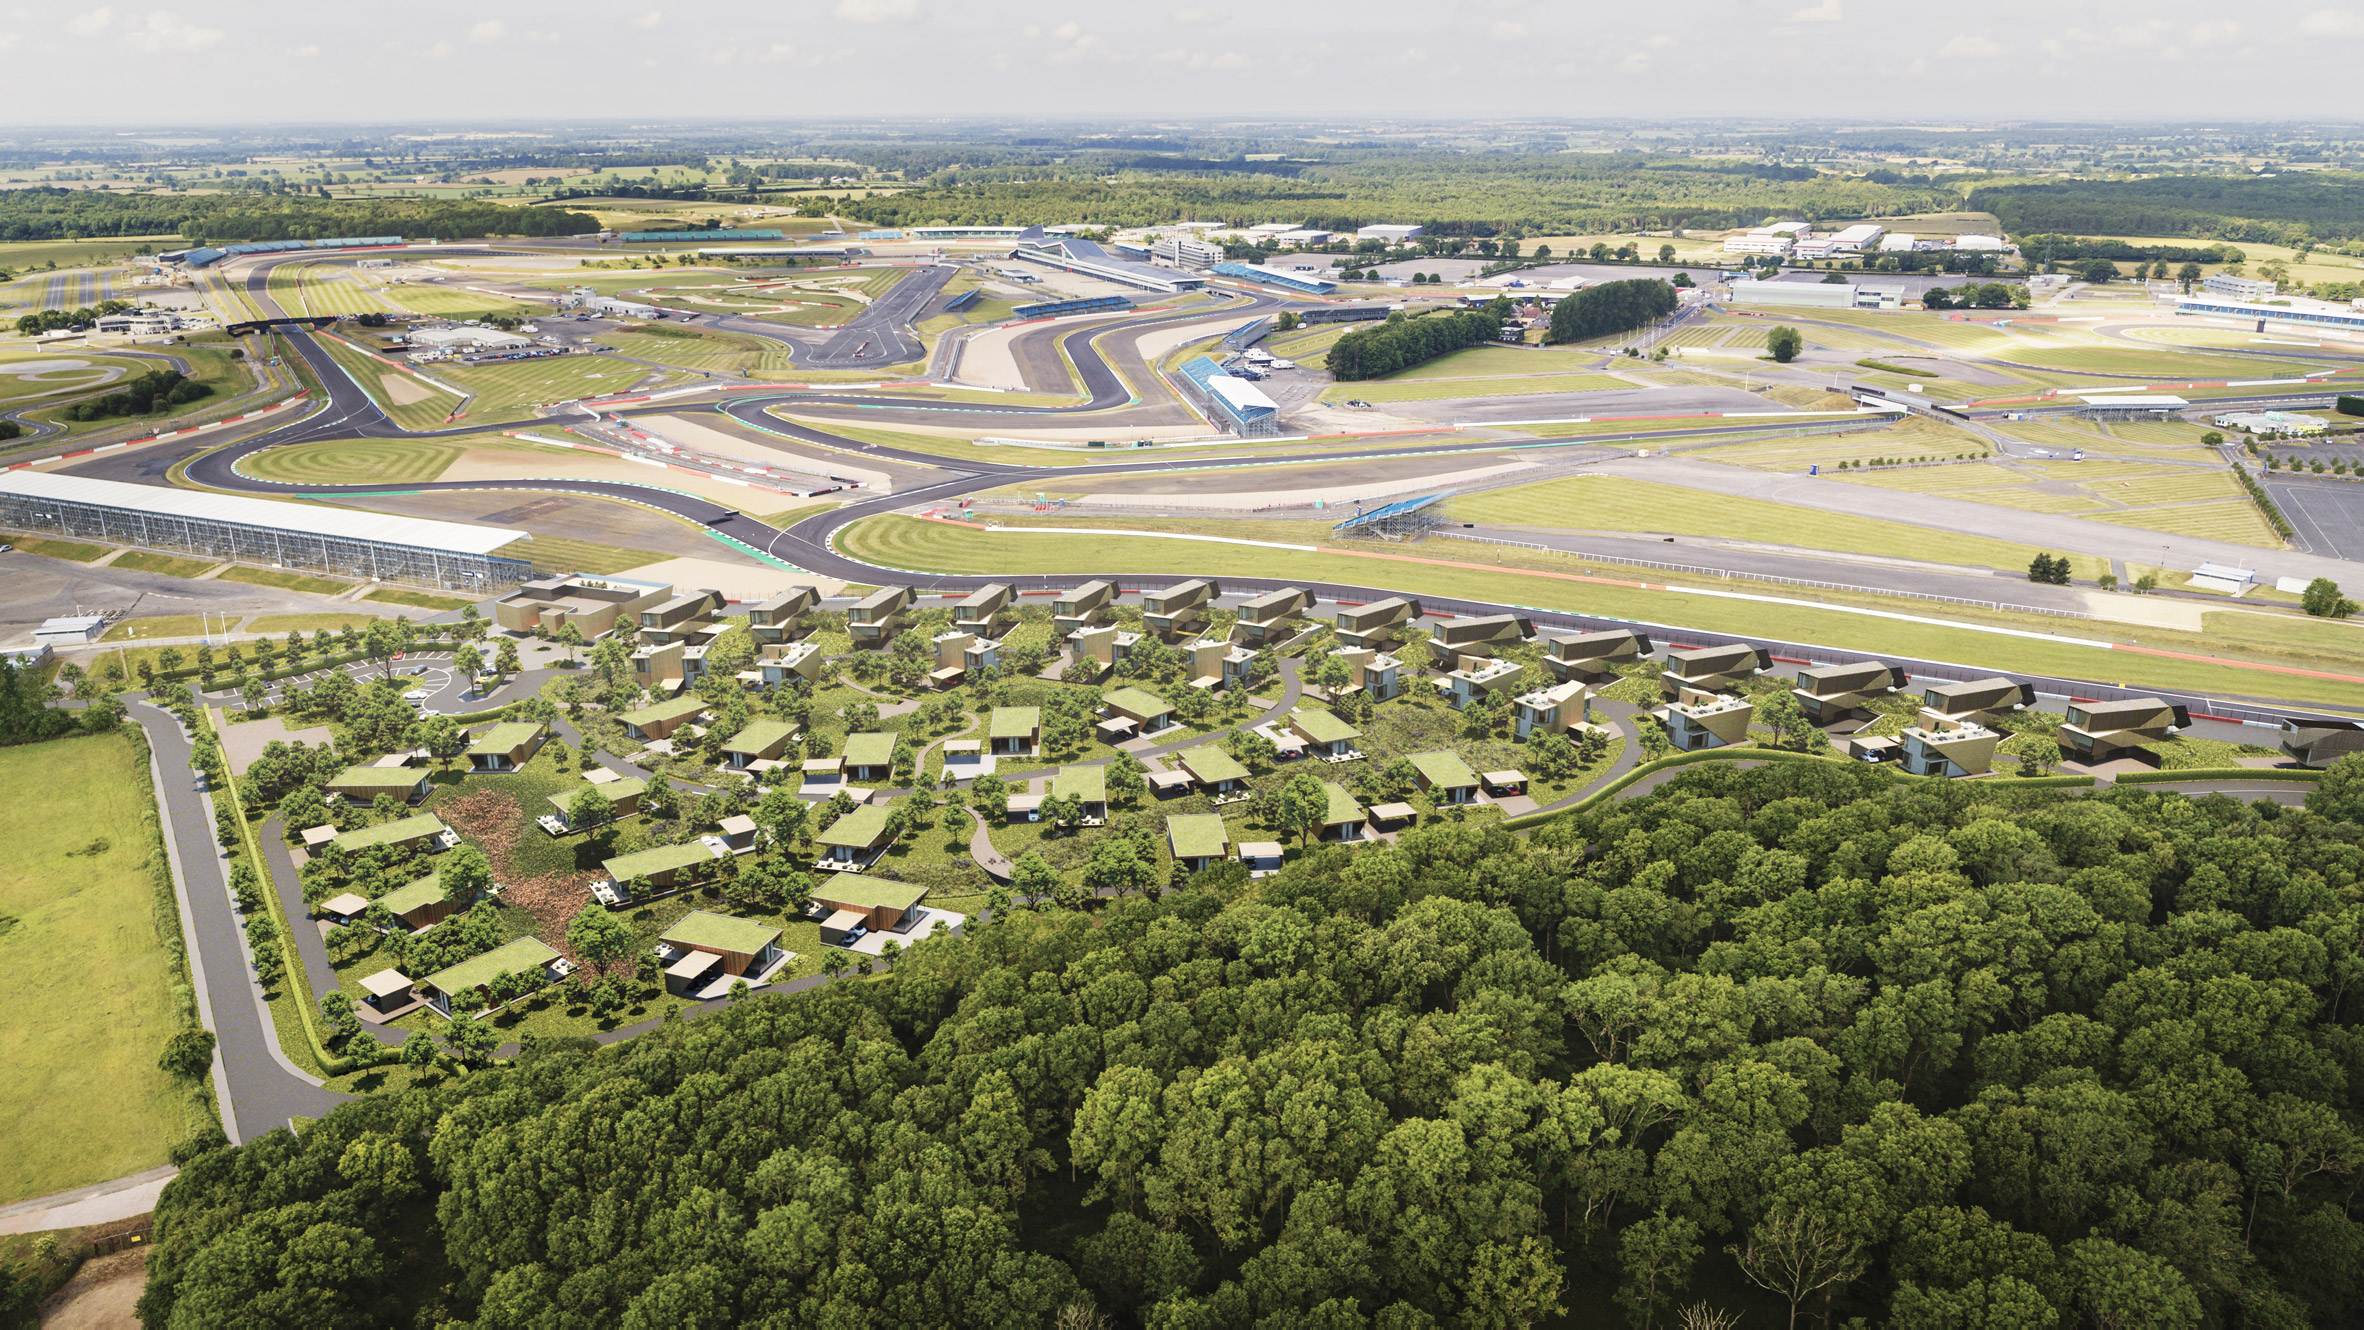 Escapade Silverstone holiday-home development at Silverstone race track by Twelve Architects